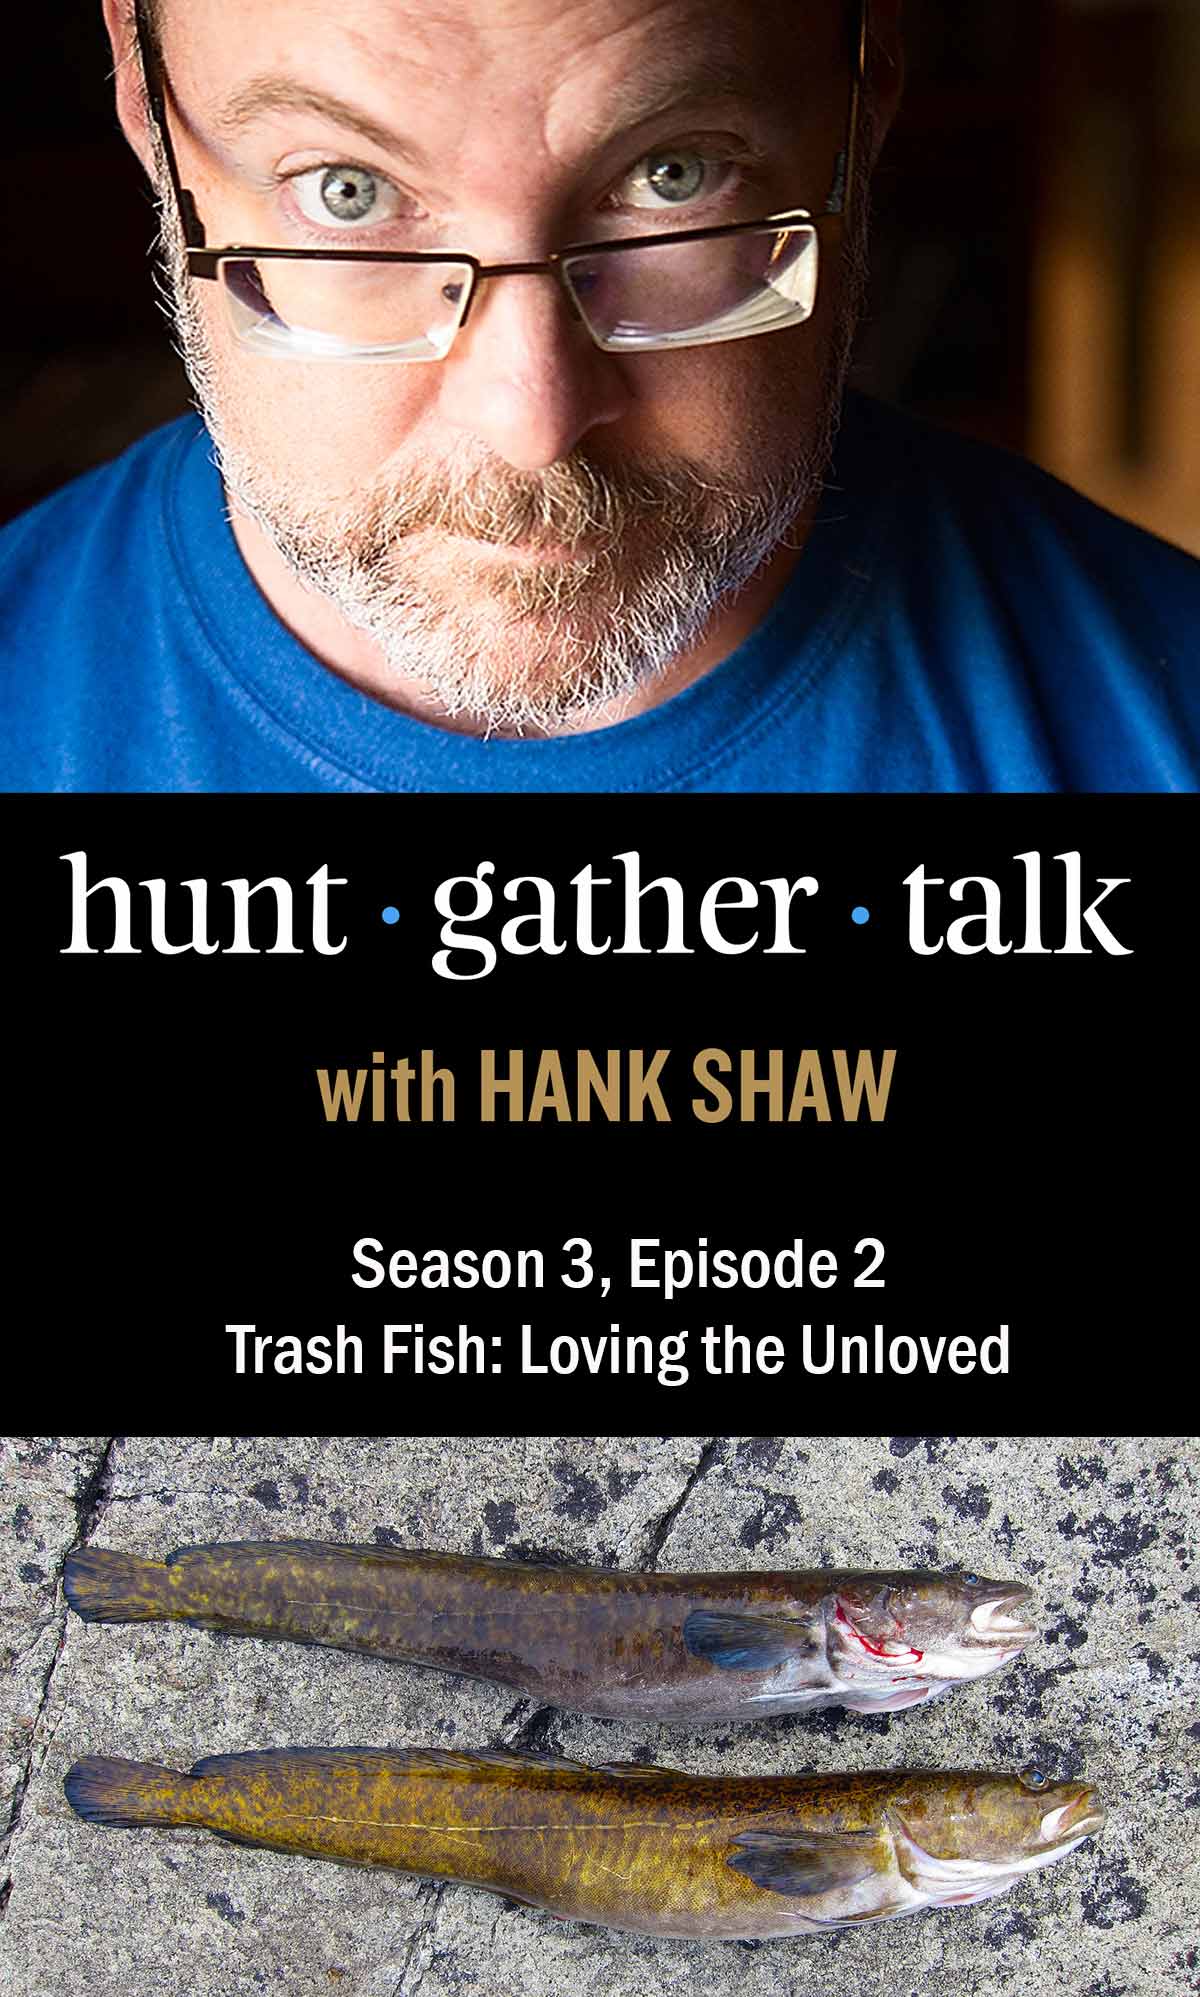 Podcast art featuring Hank Shaw and burbot fish